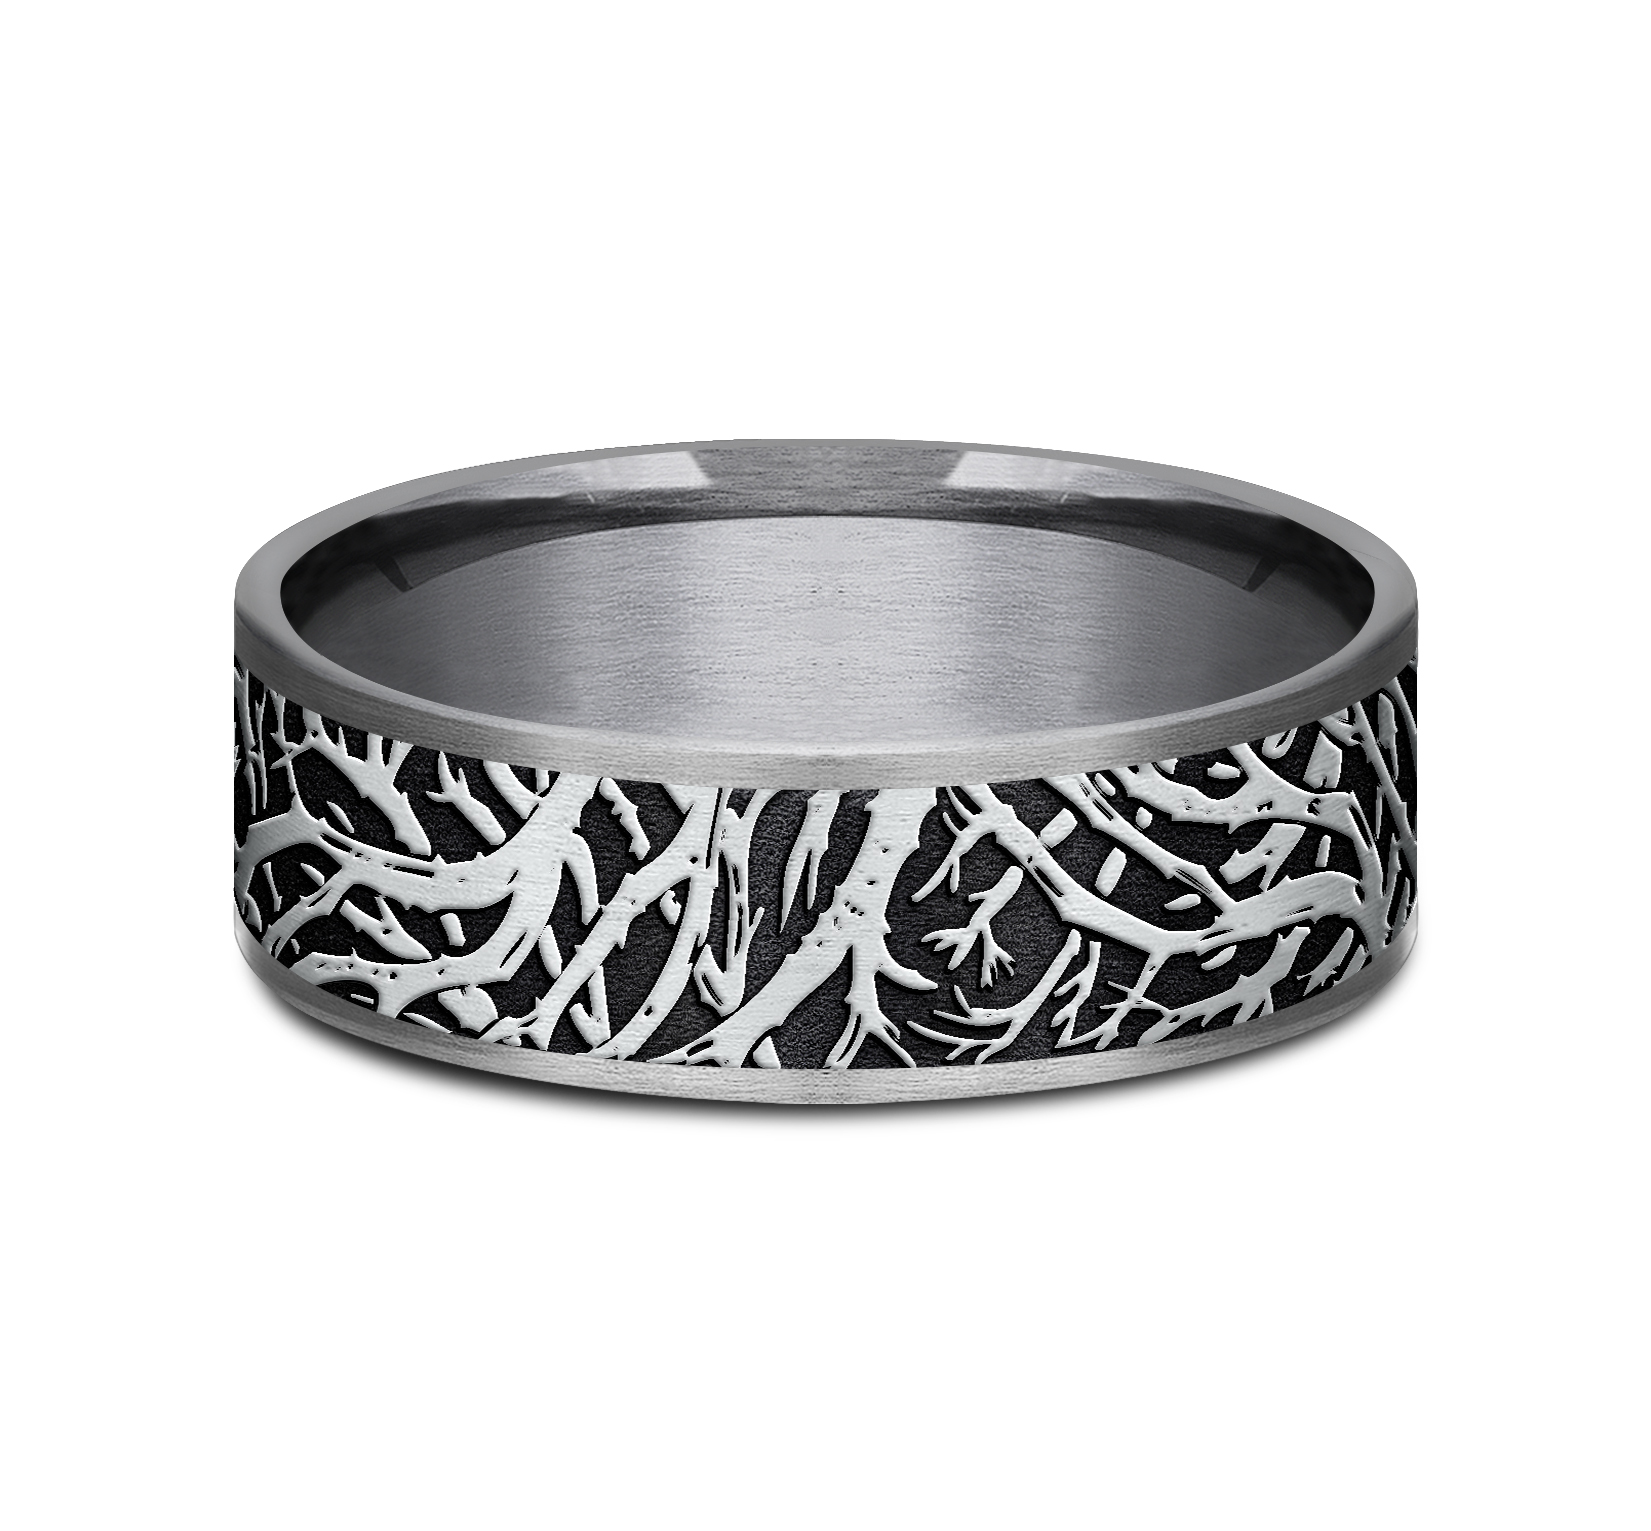 Tantalum Men's Band with 14k White Gold Enchanted Forest Motif, 7.5mm